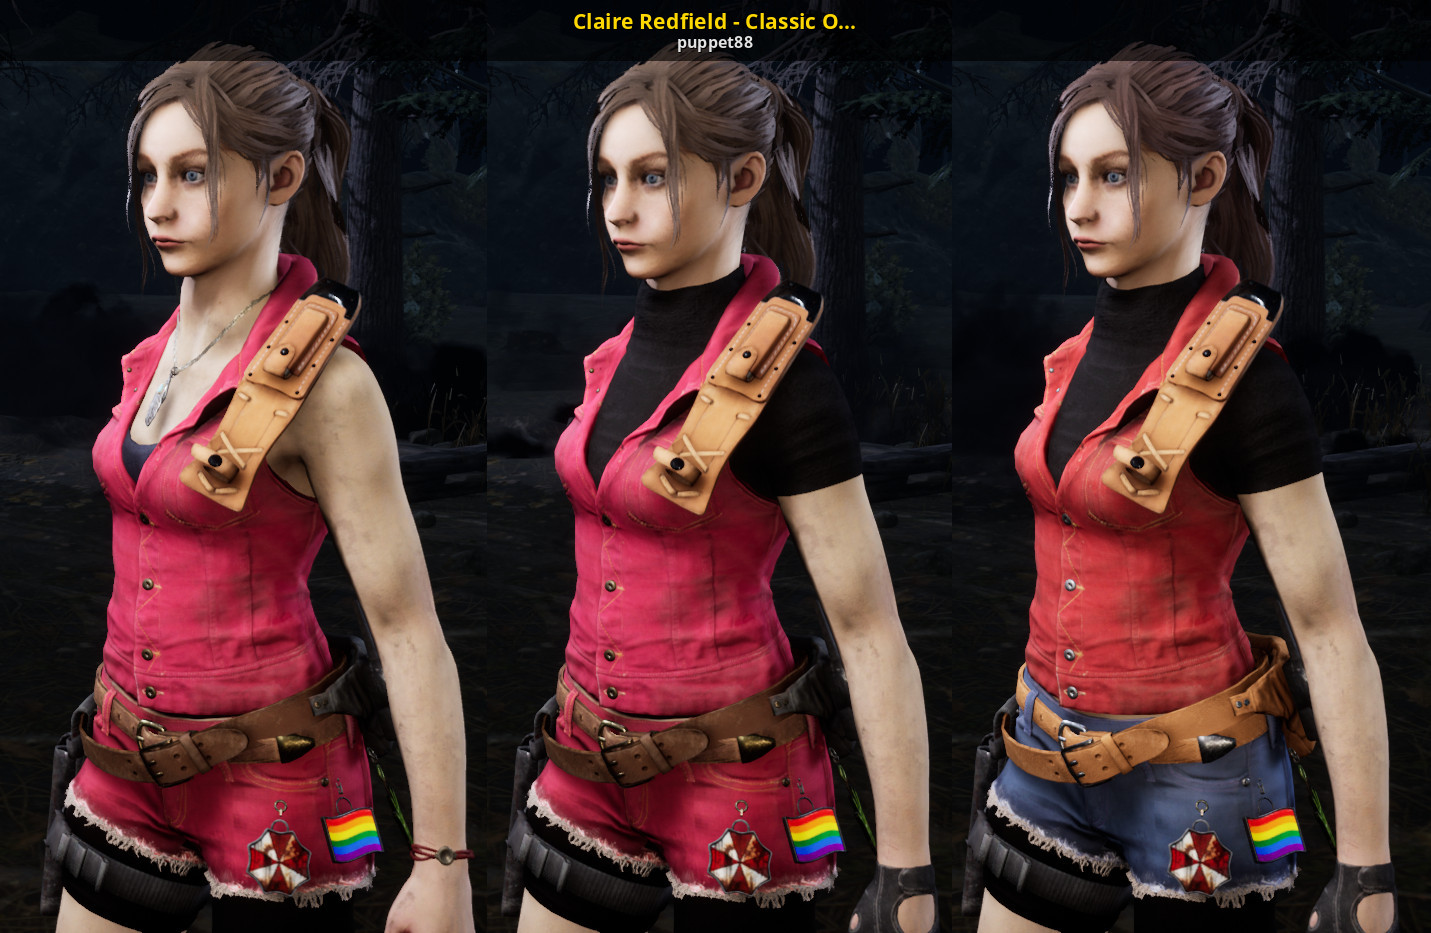 Claire Redfield - Classic Outfit. 